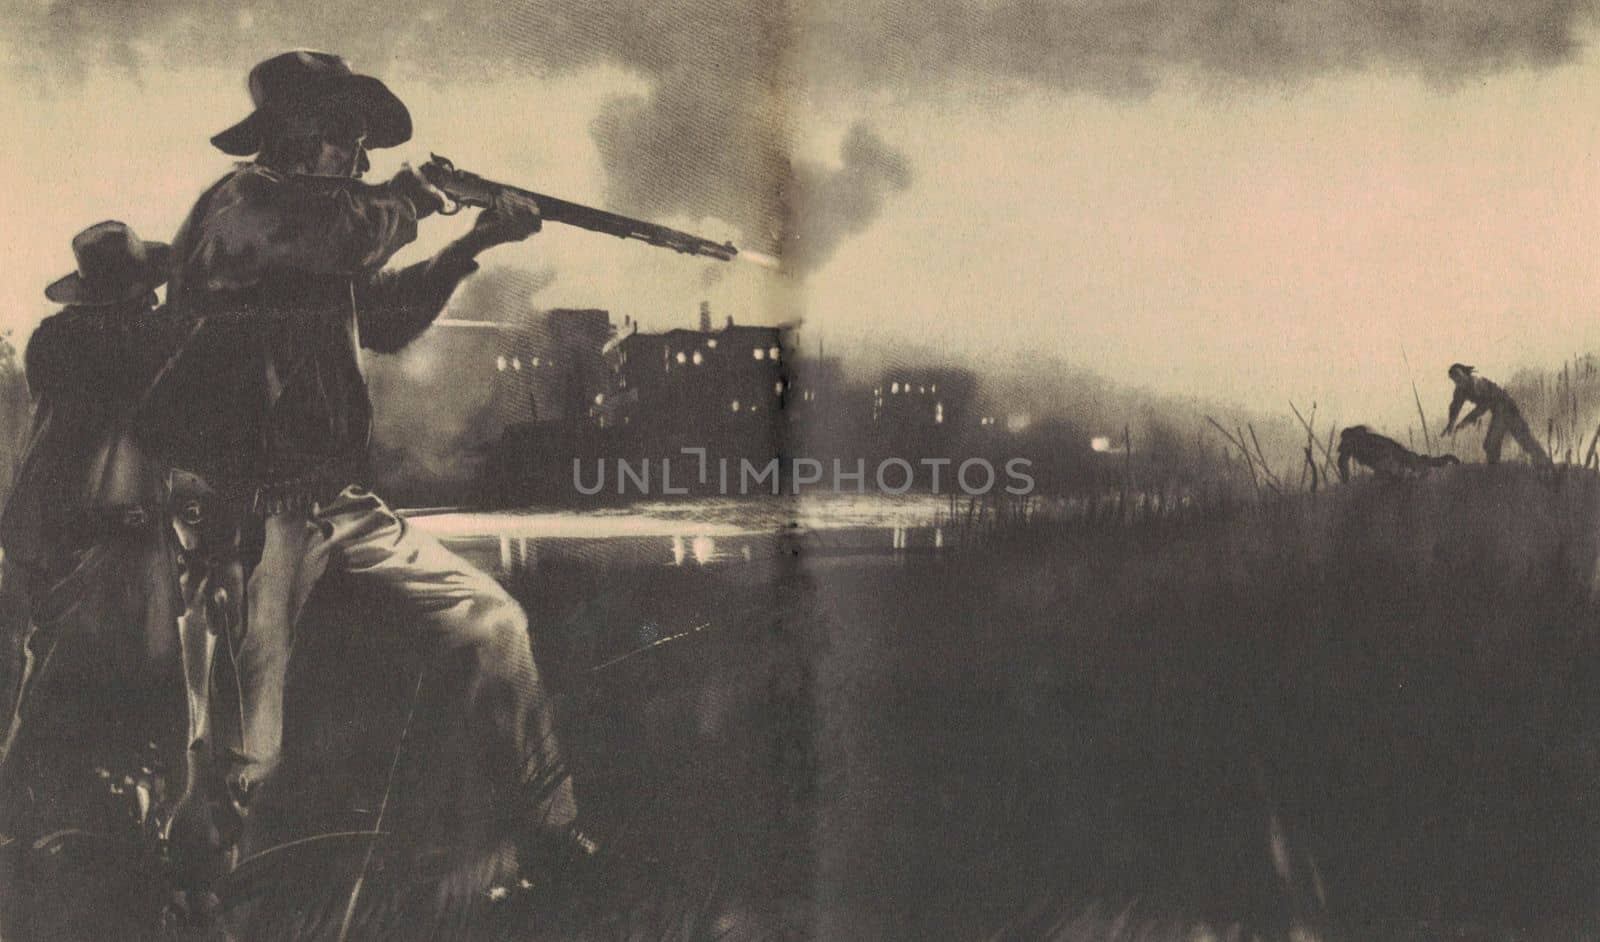 Black and white illustration shows a man firing a rifle. Drawing shows life in the Old West. Vintage black and white picture shows adventure life in the previous century.